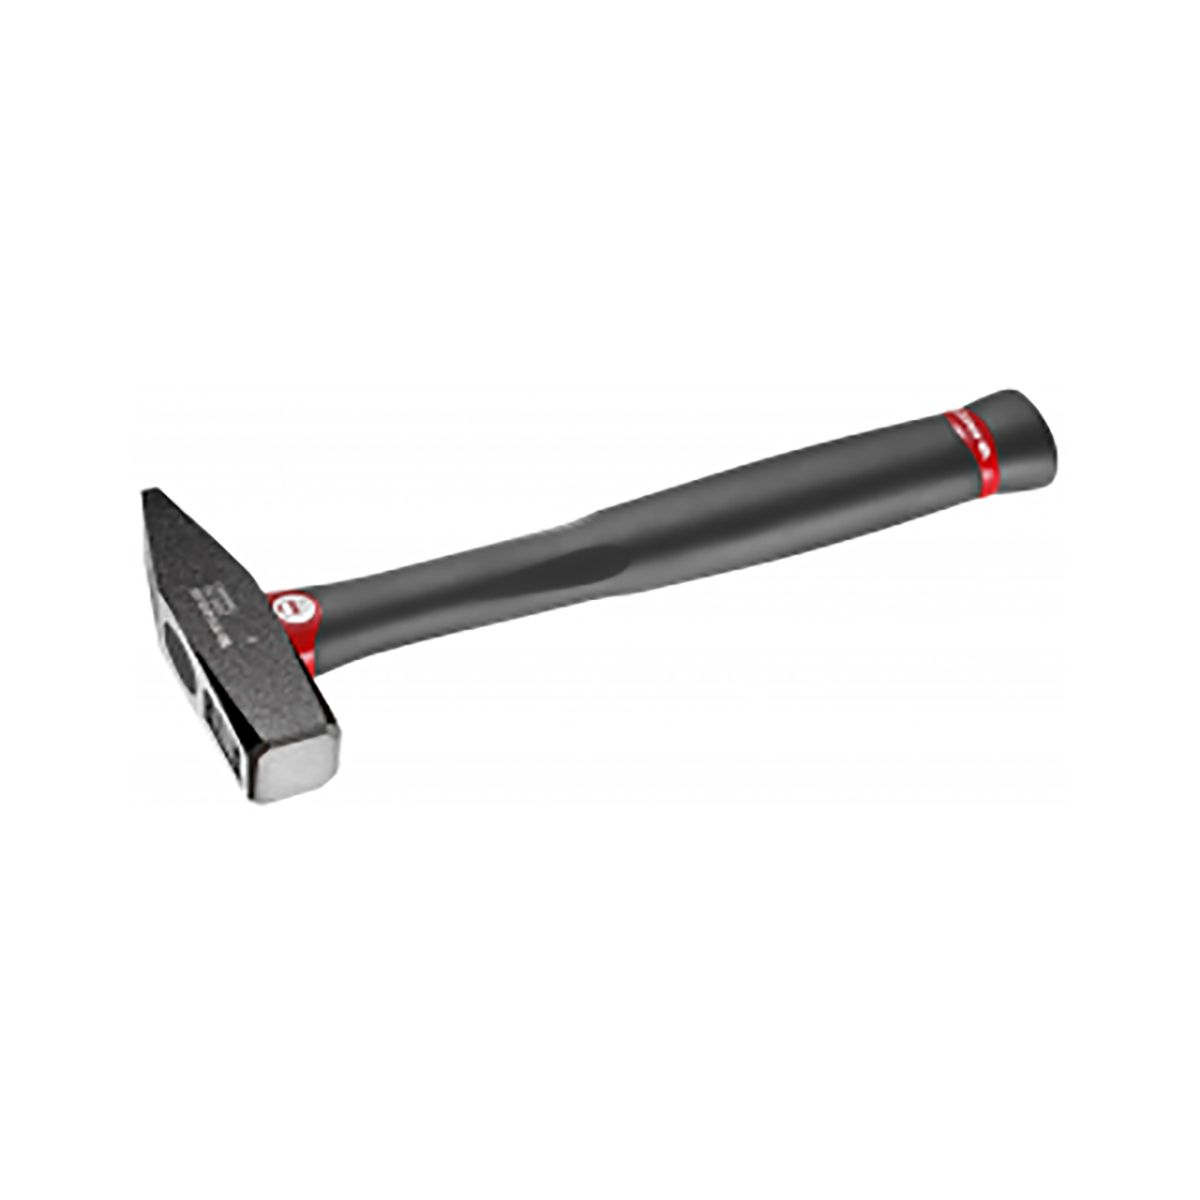 Facom Engineer's Hammer with Graphite Handle, 380g